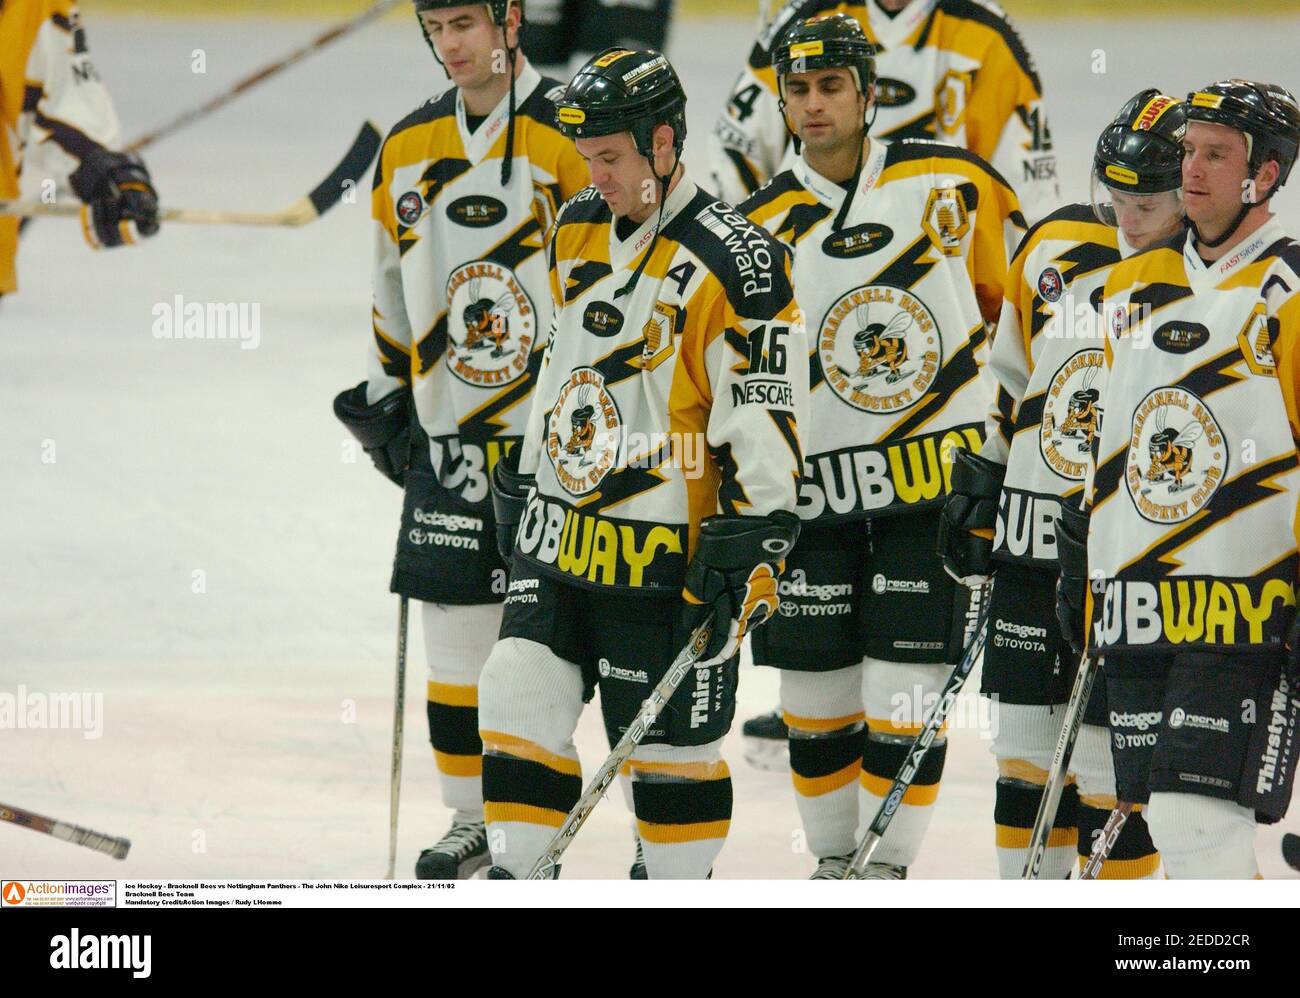 Ice Hockey - Bracknell Bees vs Nottingham Panthers - The John Nike  Leisuresport Complex - 21/11/02 Bracknell Bees Team Mandatory Credit:Action  Images / Rudy LHomme Stock Photo - Alamy